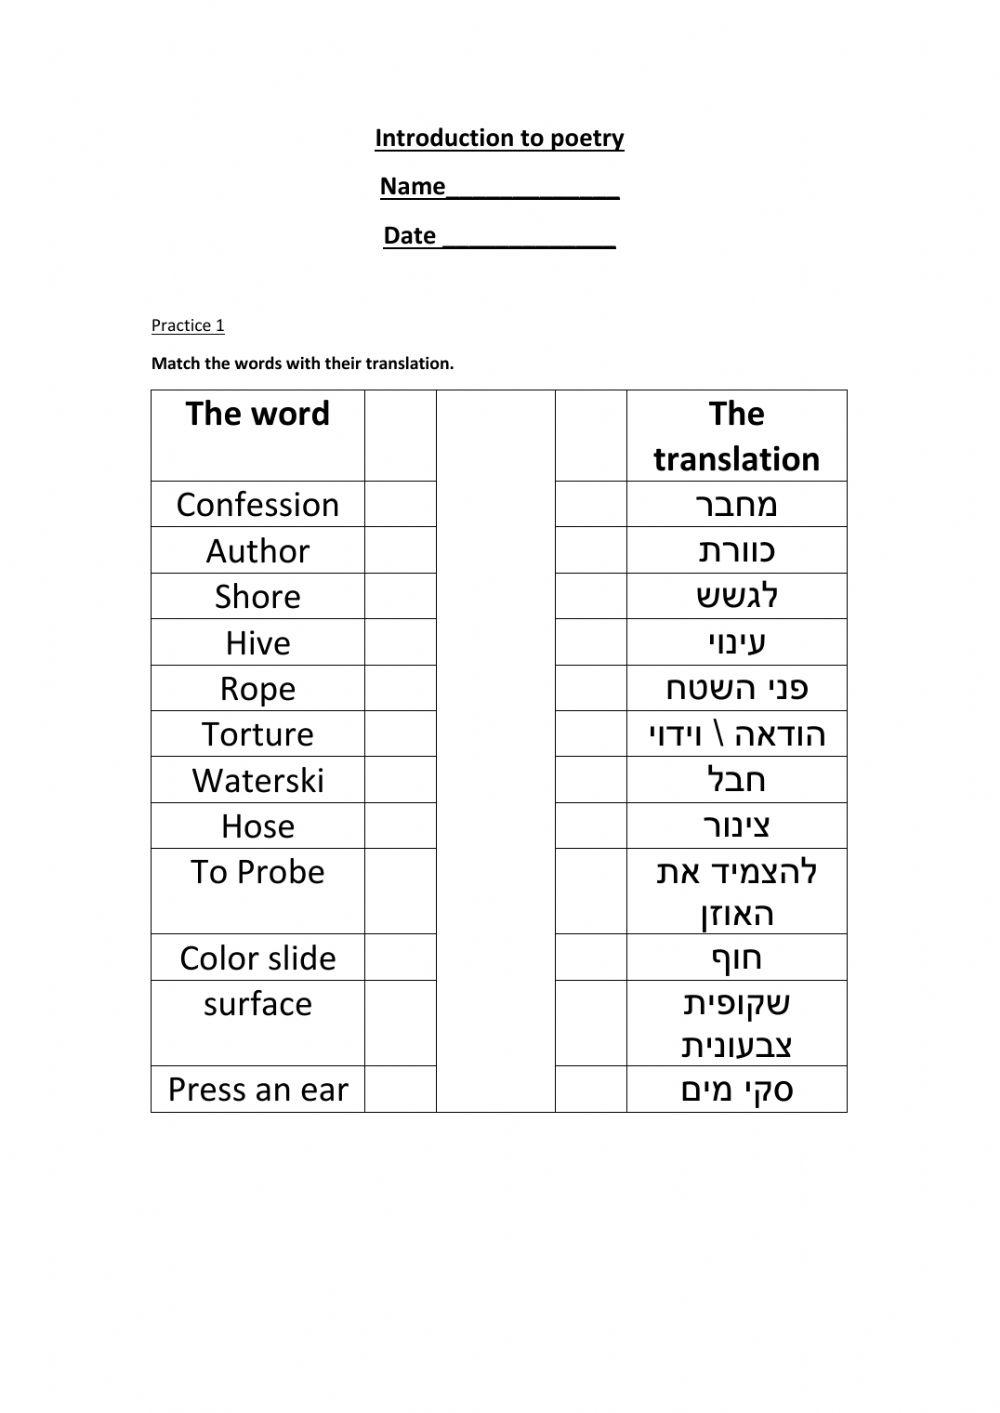 Introduction to poetry - vocabulary